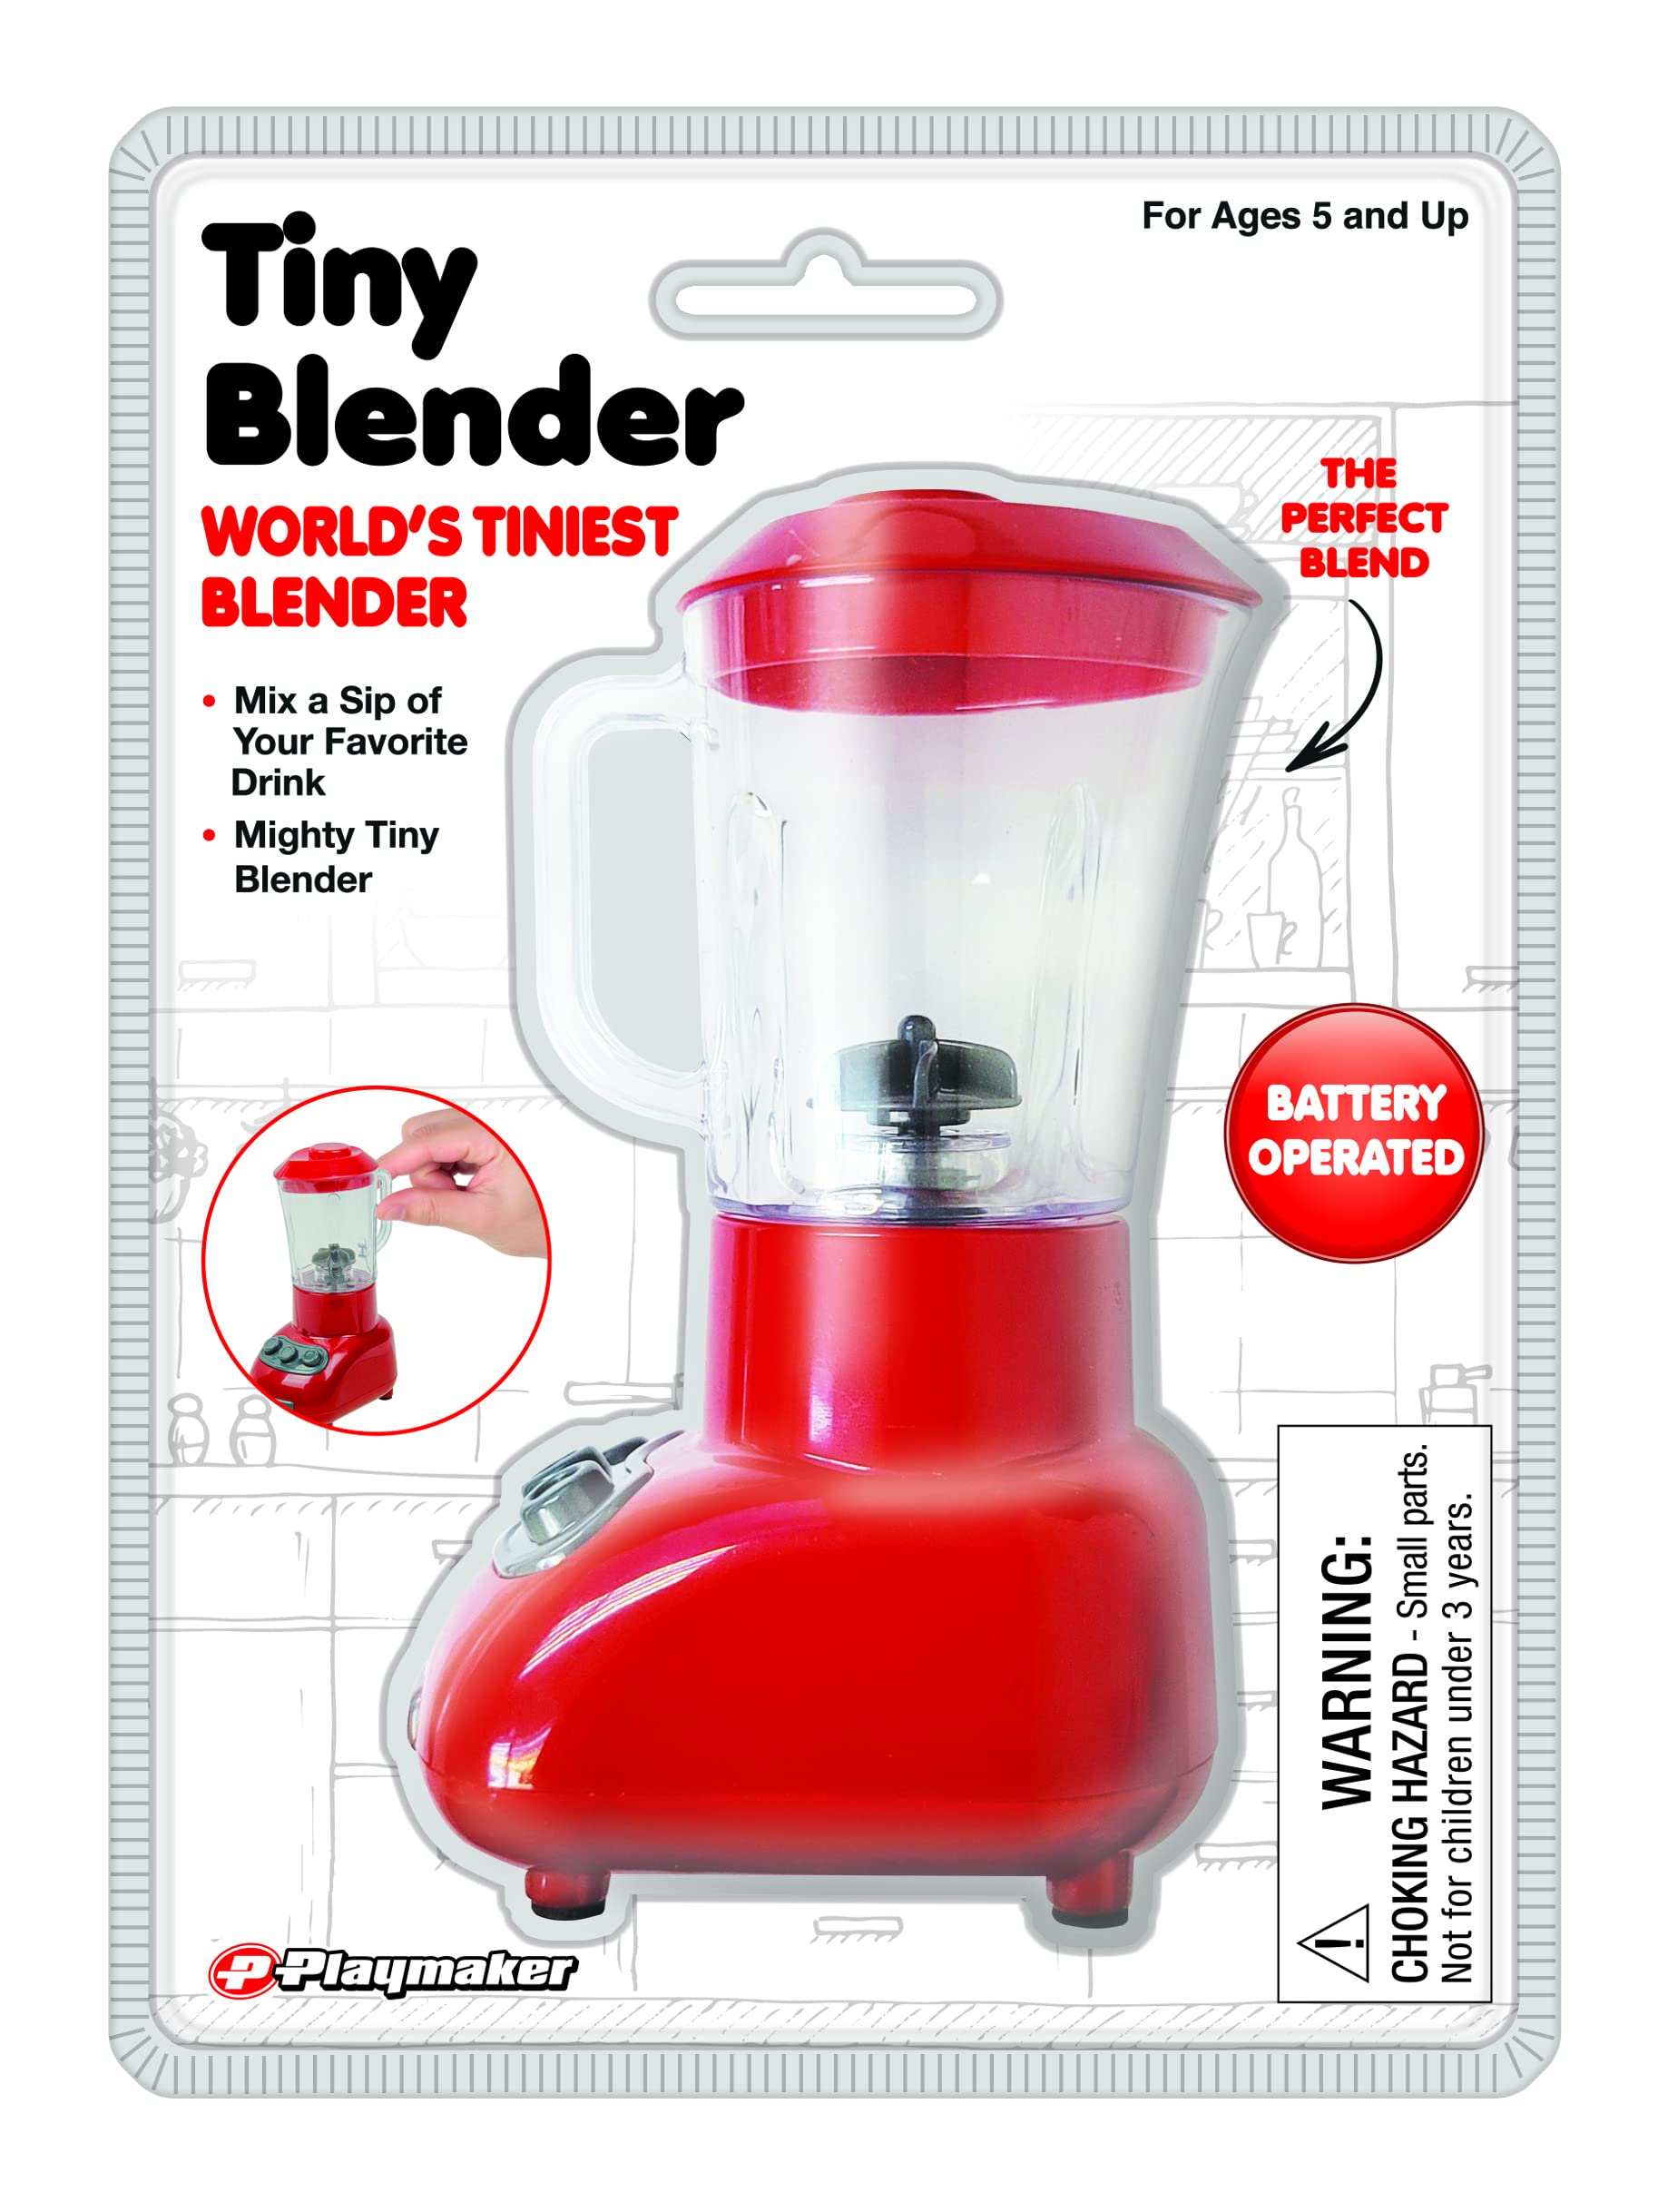 World's Tiniest Blender, Actually Blends, Perfect for Powdered Drinks